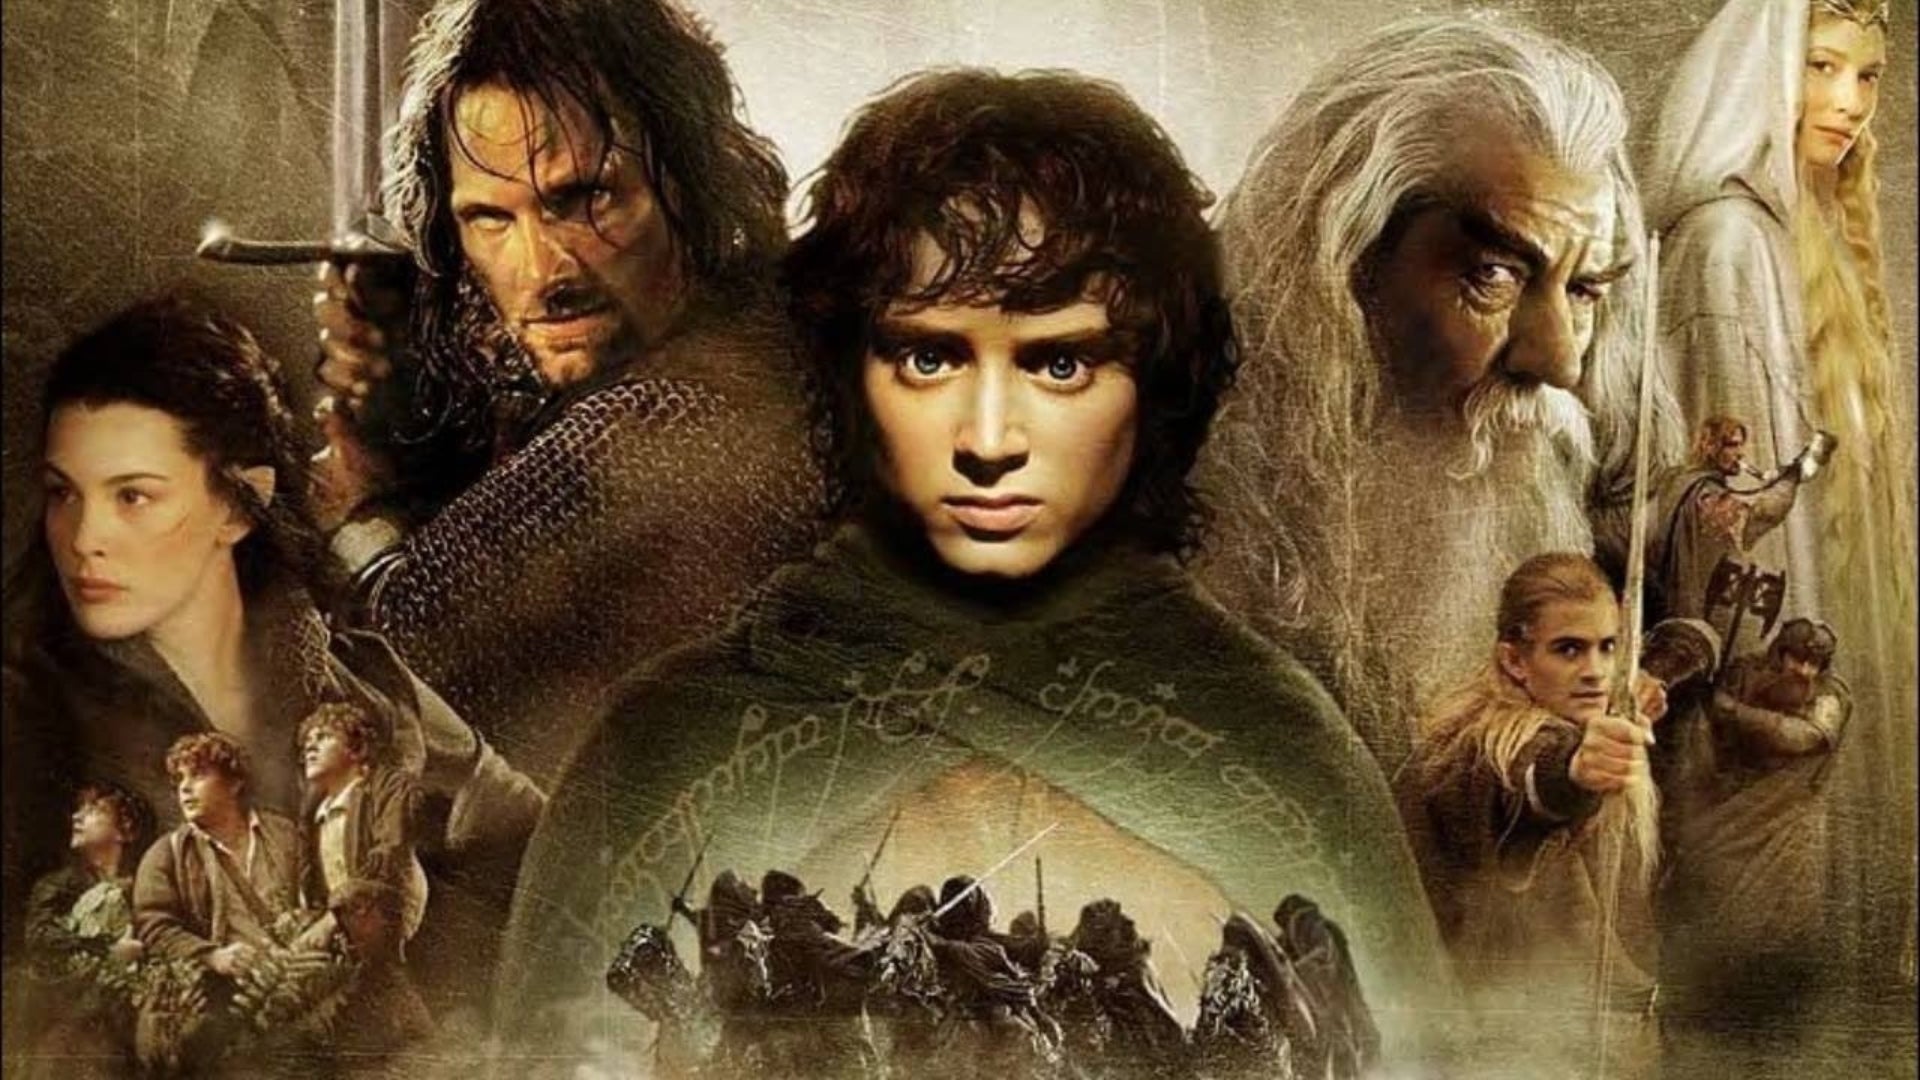 Warner Bros. Returning to Middle Earth With New ‘The Lord of the Rings’ Movies